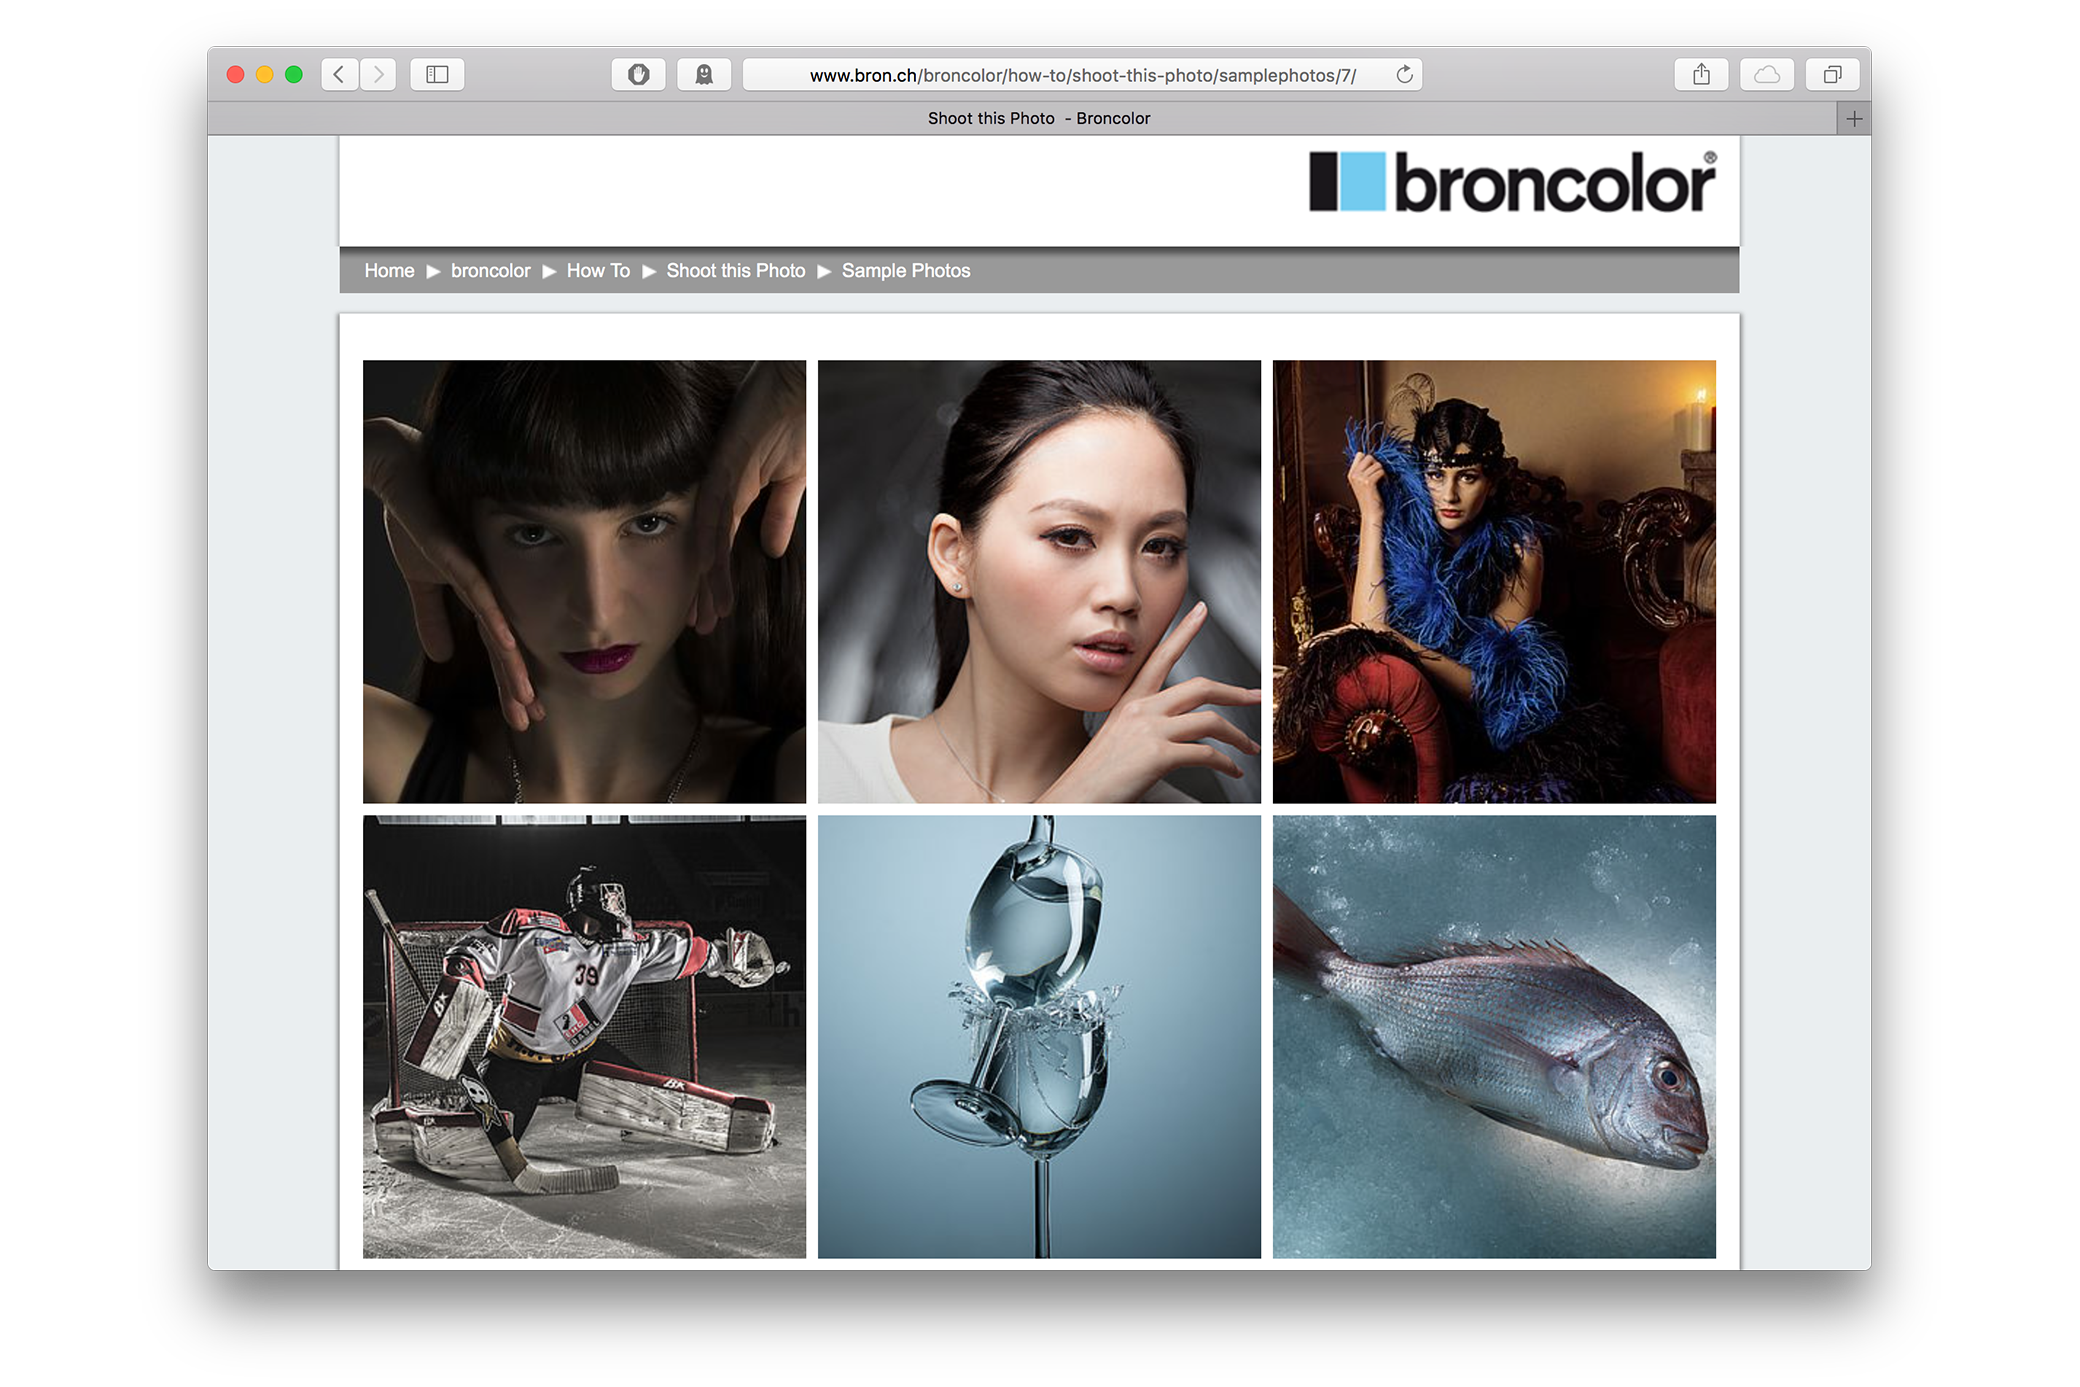 Excellent How To section on Broncolor's website